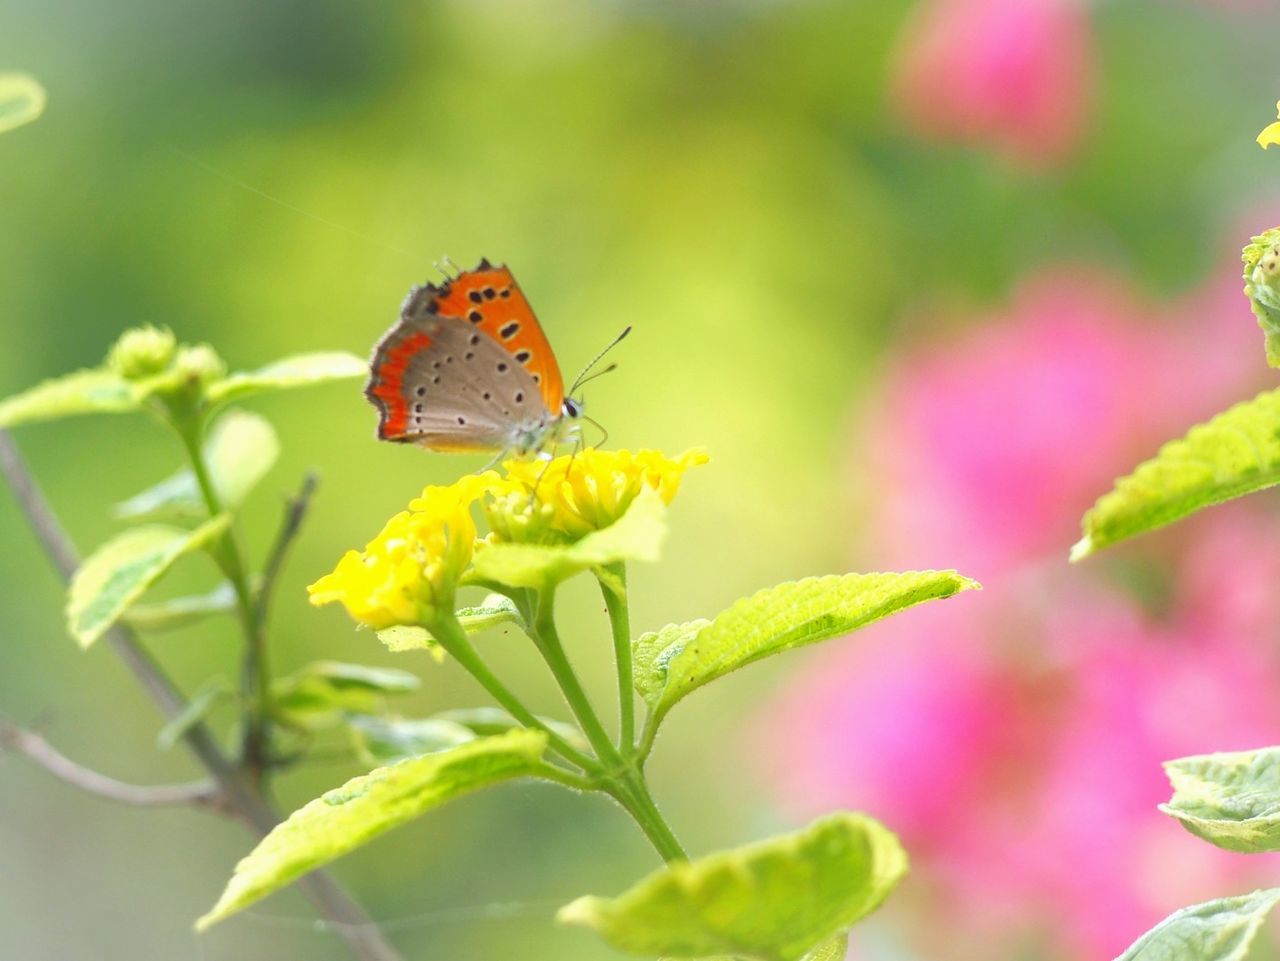 invertebrate, insect, animal wildlife, flower, animal themes, animal, beauty in nature, flowering plant, animals in the wild, plant, one animal, vulnerability, fragility, close-up, animal wing, butterfly - insect, growth, petal, flower head, focus on foreground, no people, pollination, butterfly, springtime